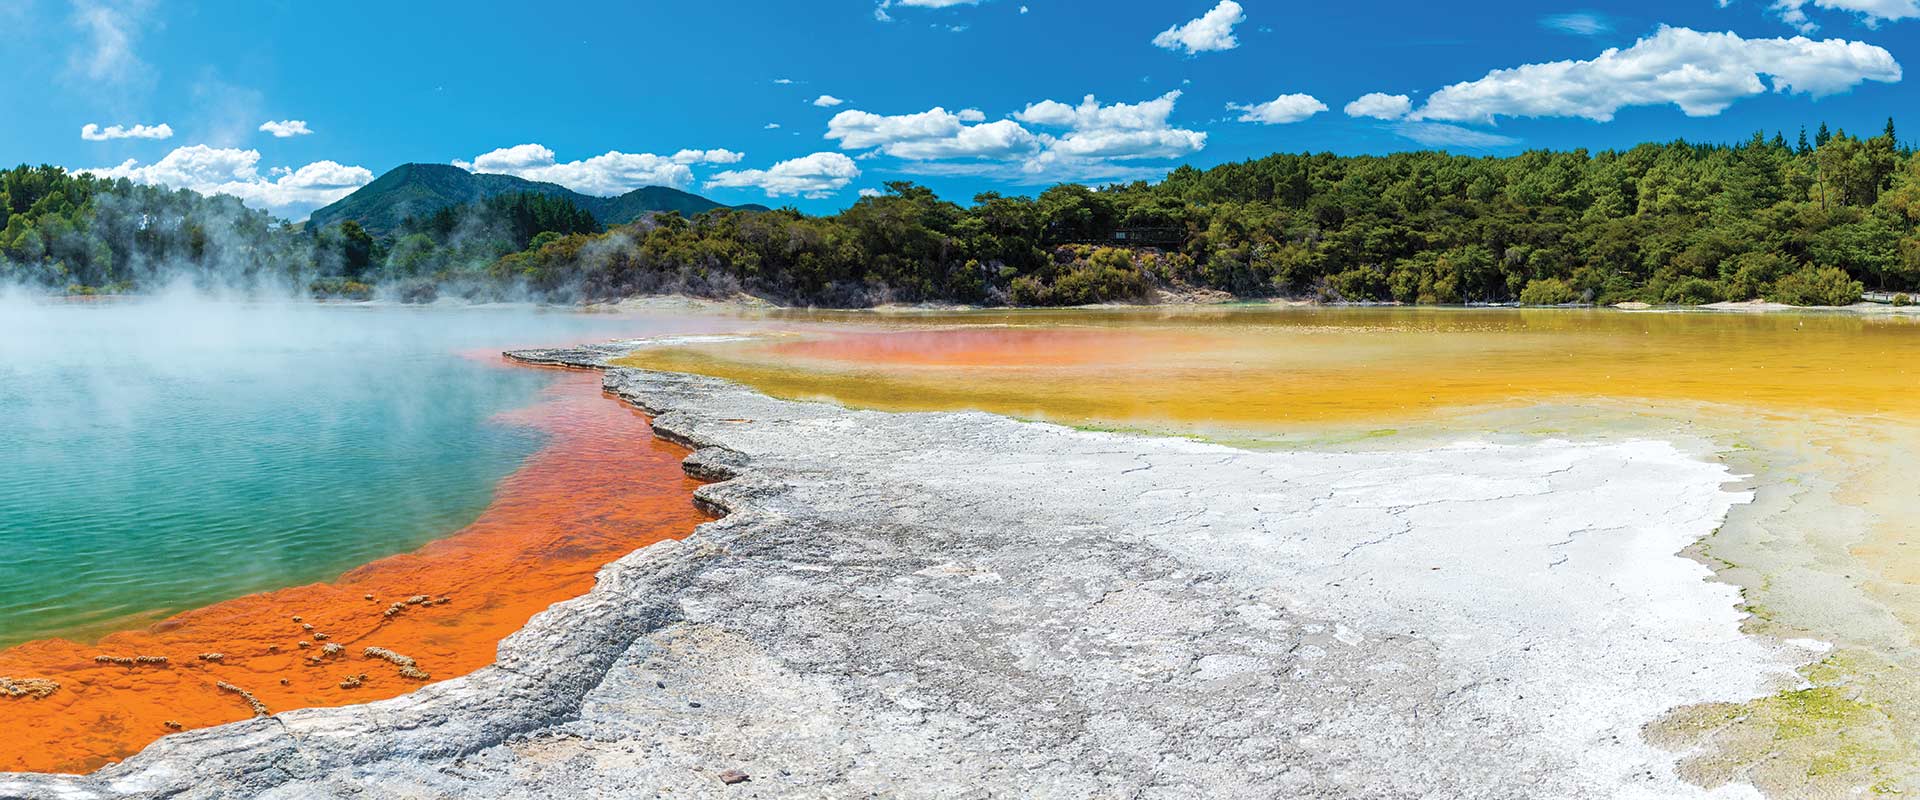 Steaming thermal pool ringed with orange sulphur bands and boiling mud pools